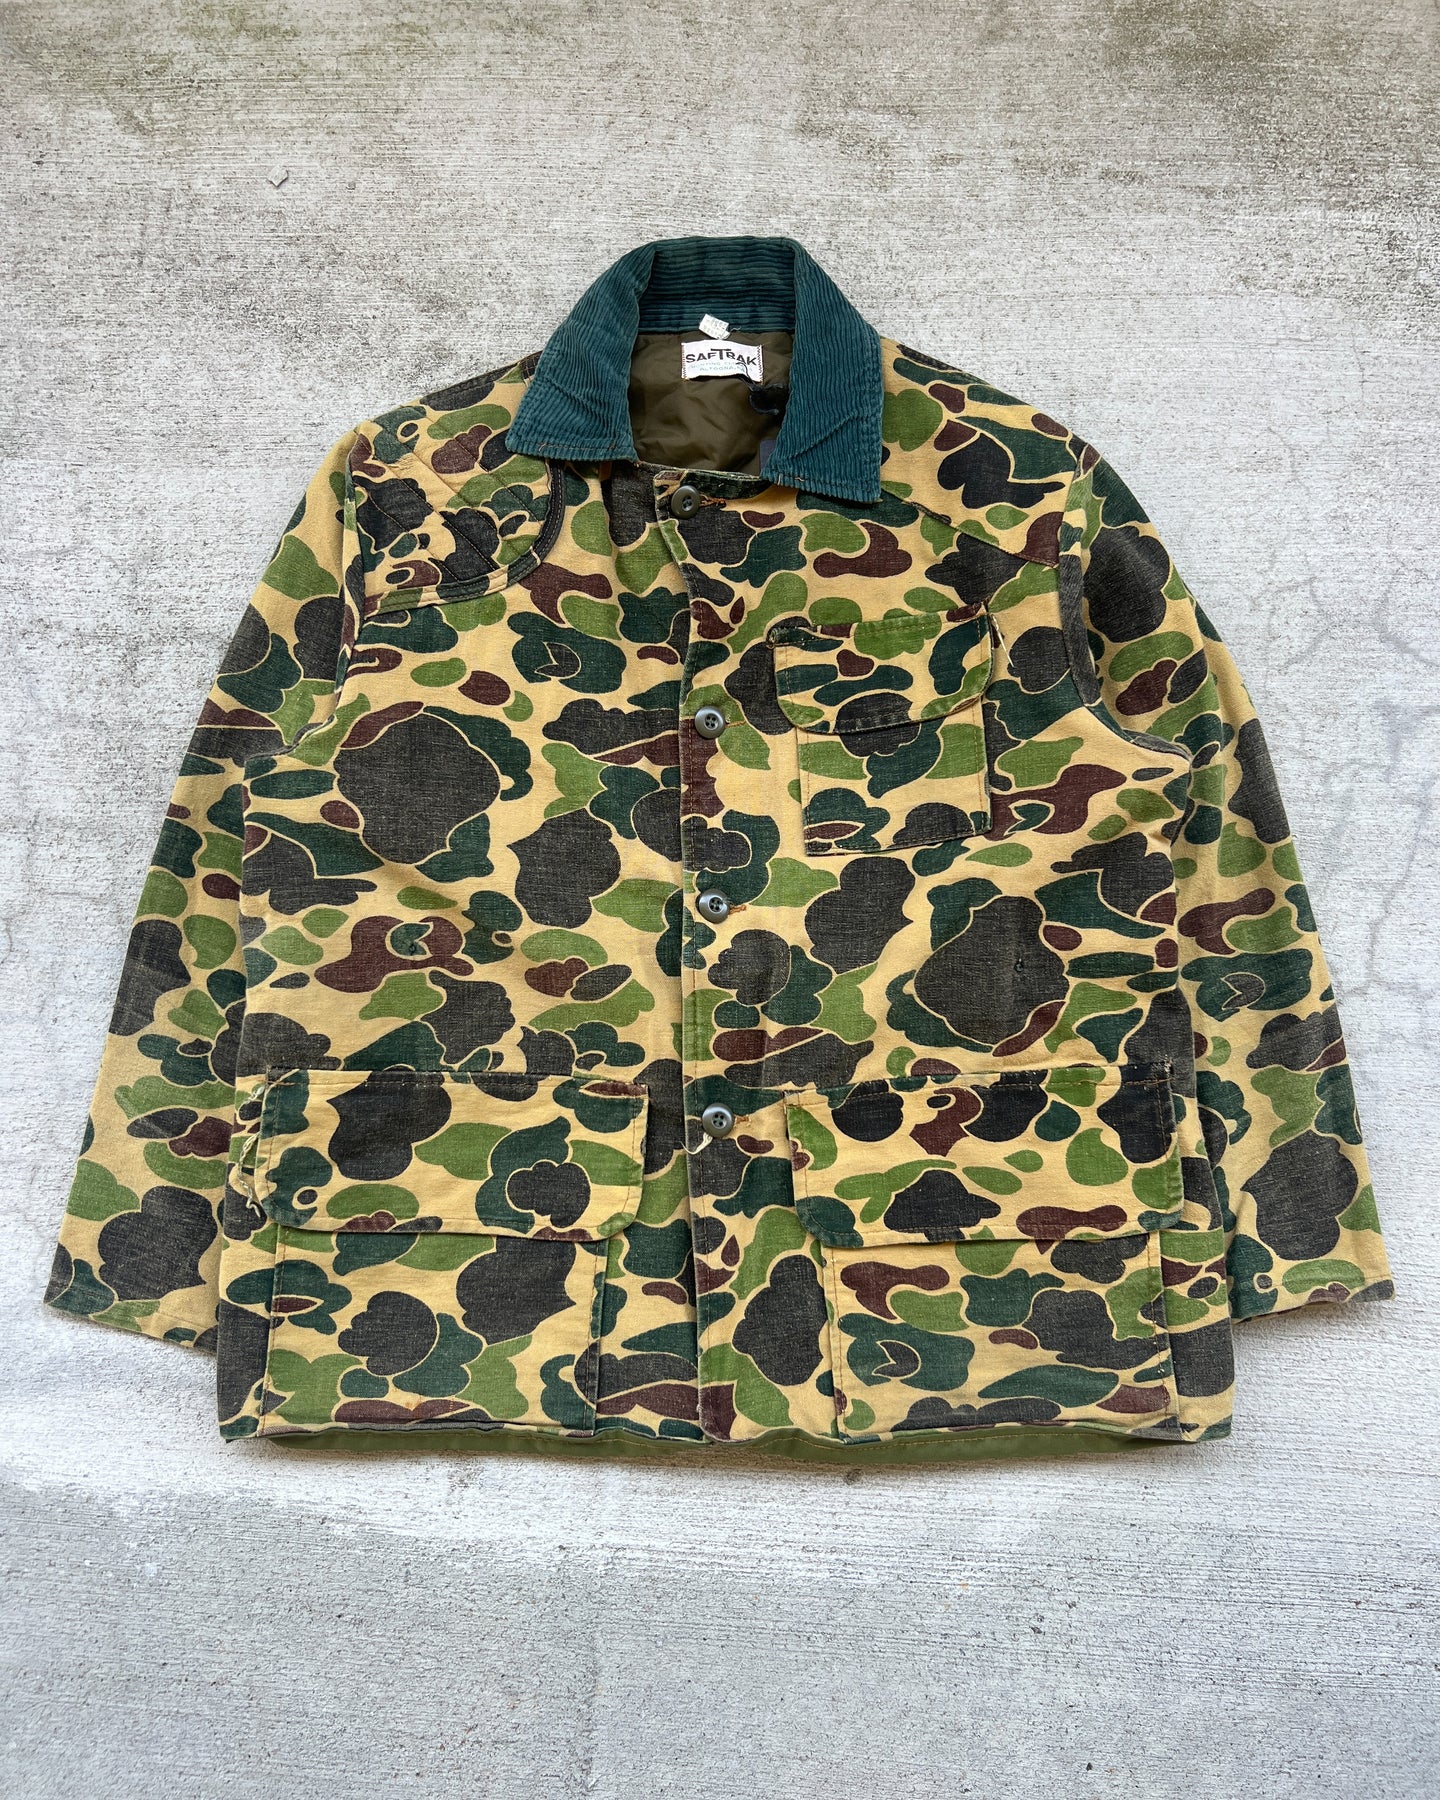 1960s Camo Duck Hunting Jacket - X-Large